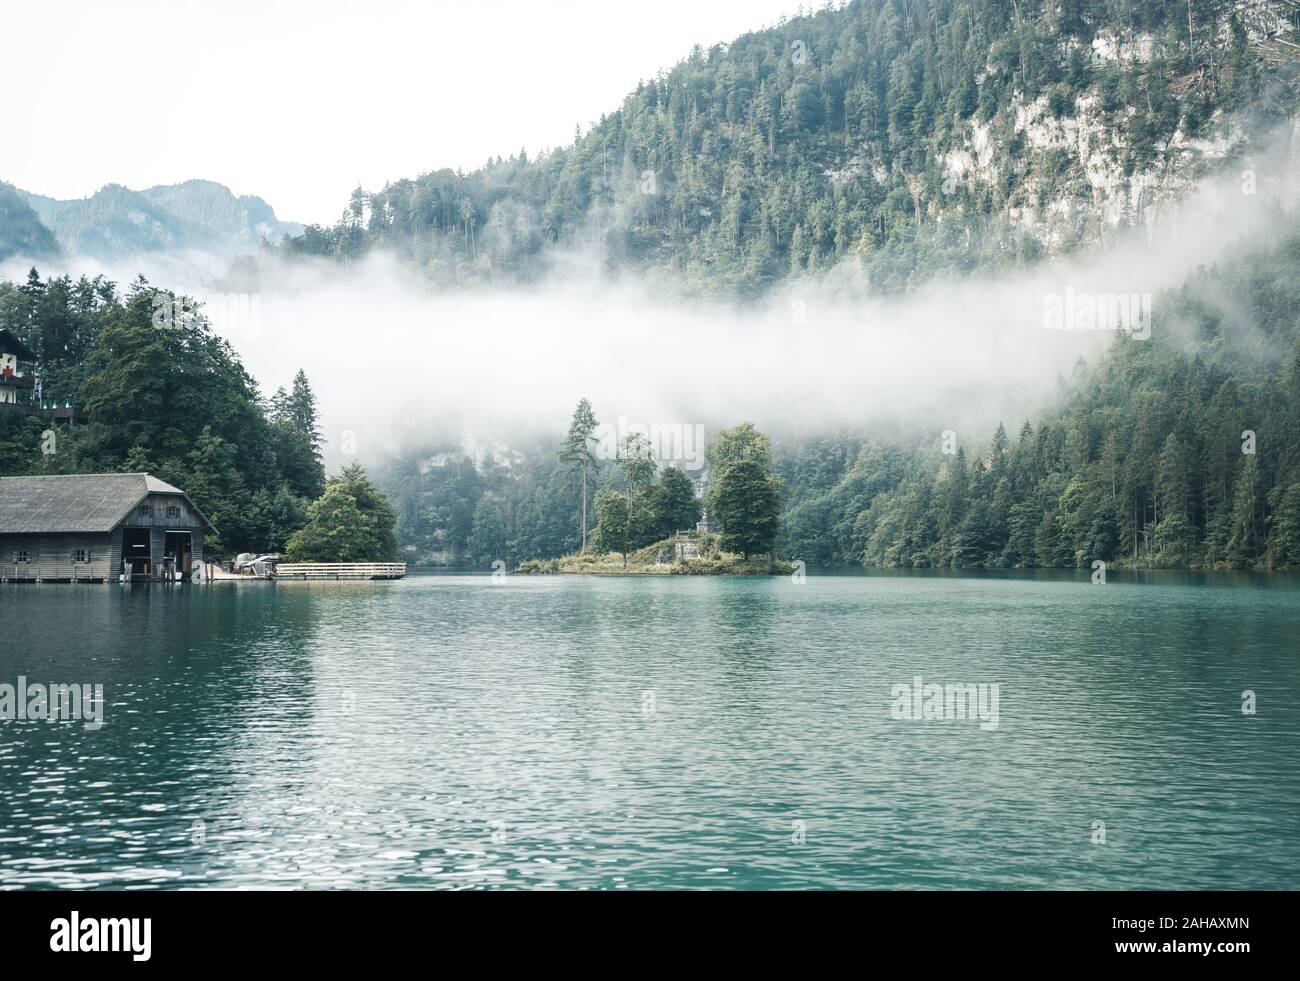 The island Christlieger in the fog at the Koenigssee (Königssee) in the Berchtesgadener Land, Bavaria, GermanyThe island Christlieger in the fog at th Stock Photo